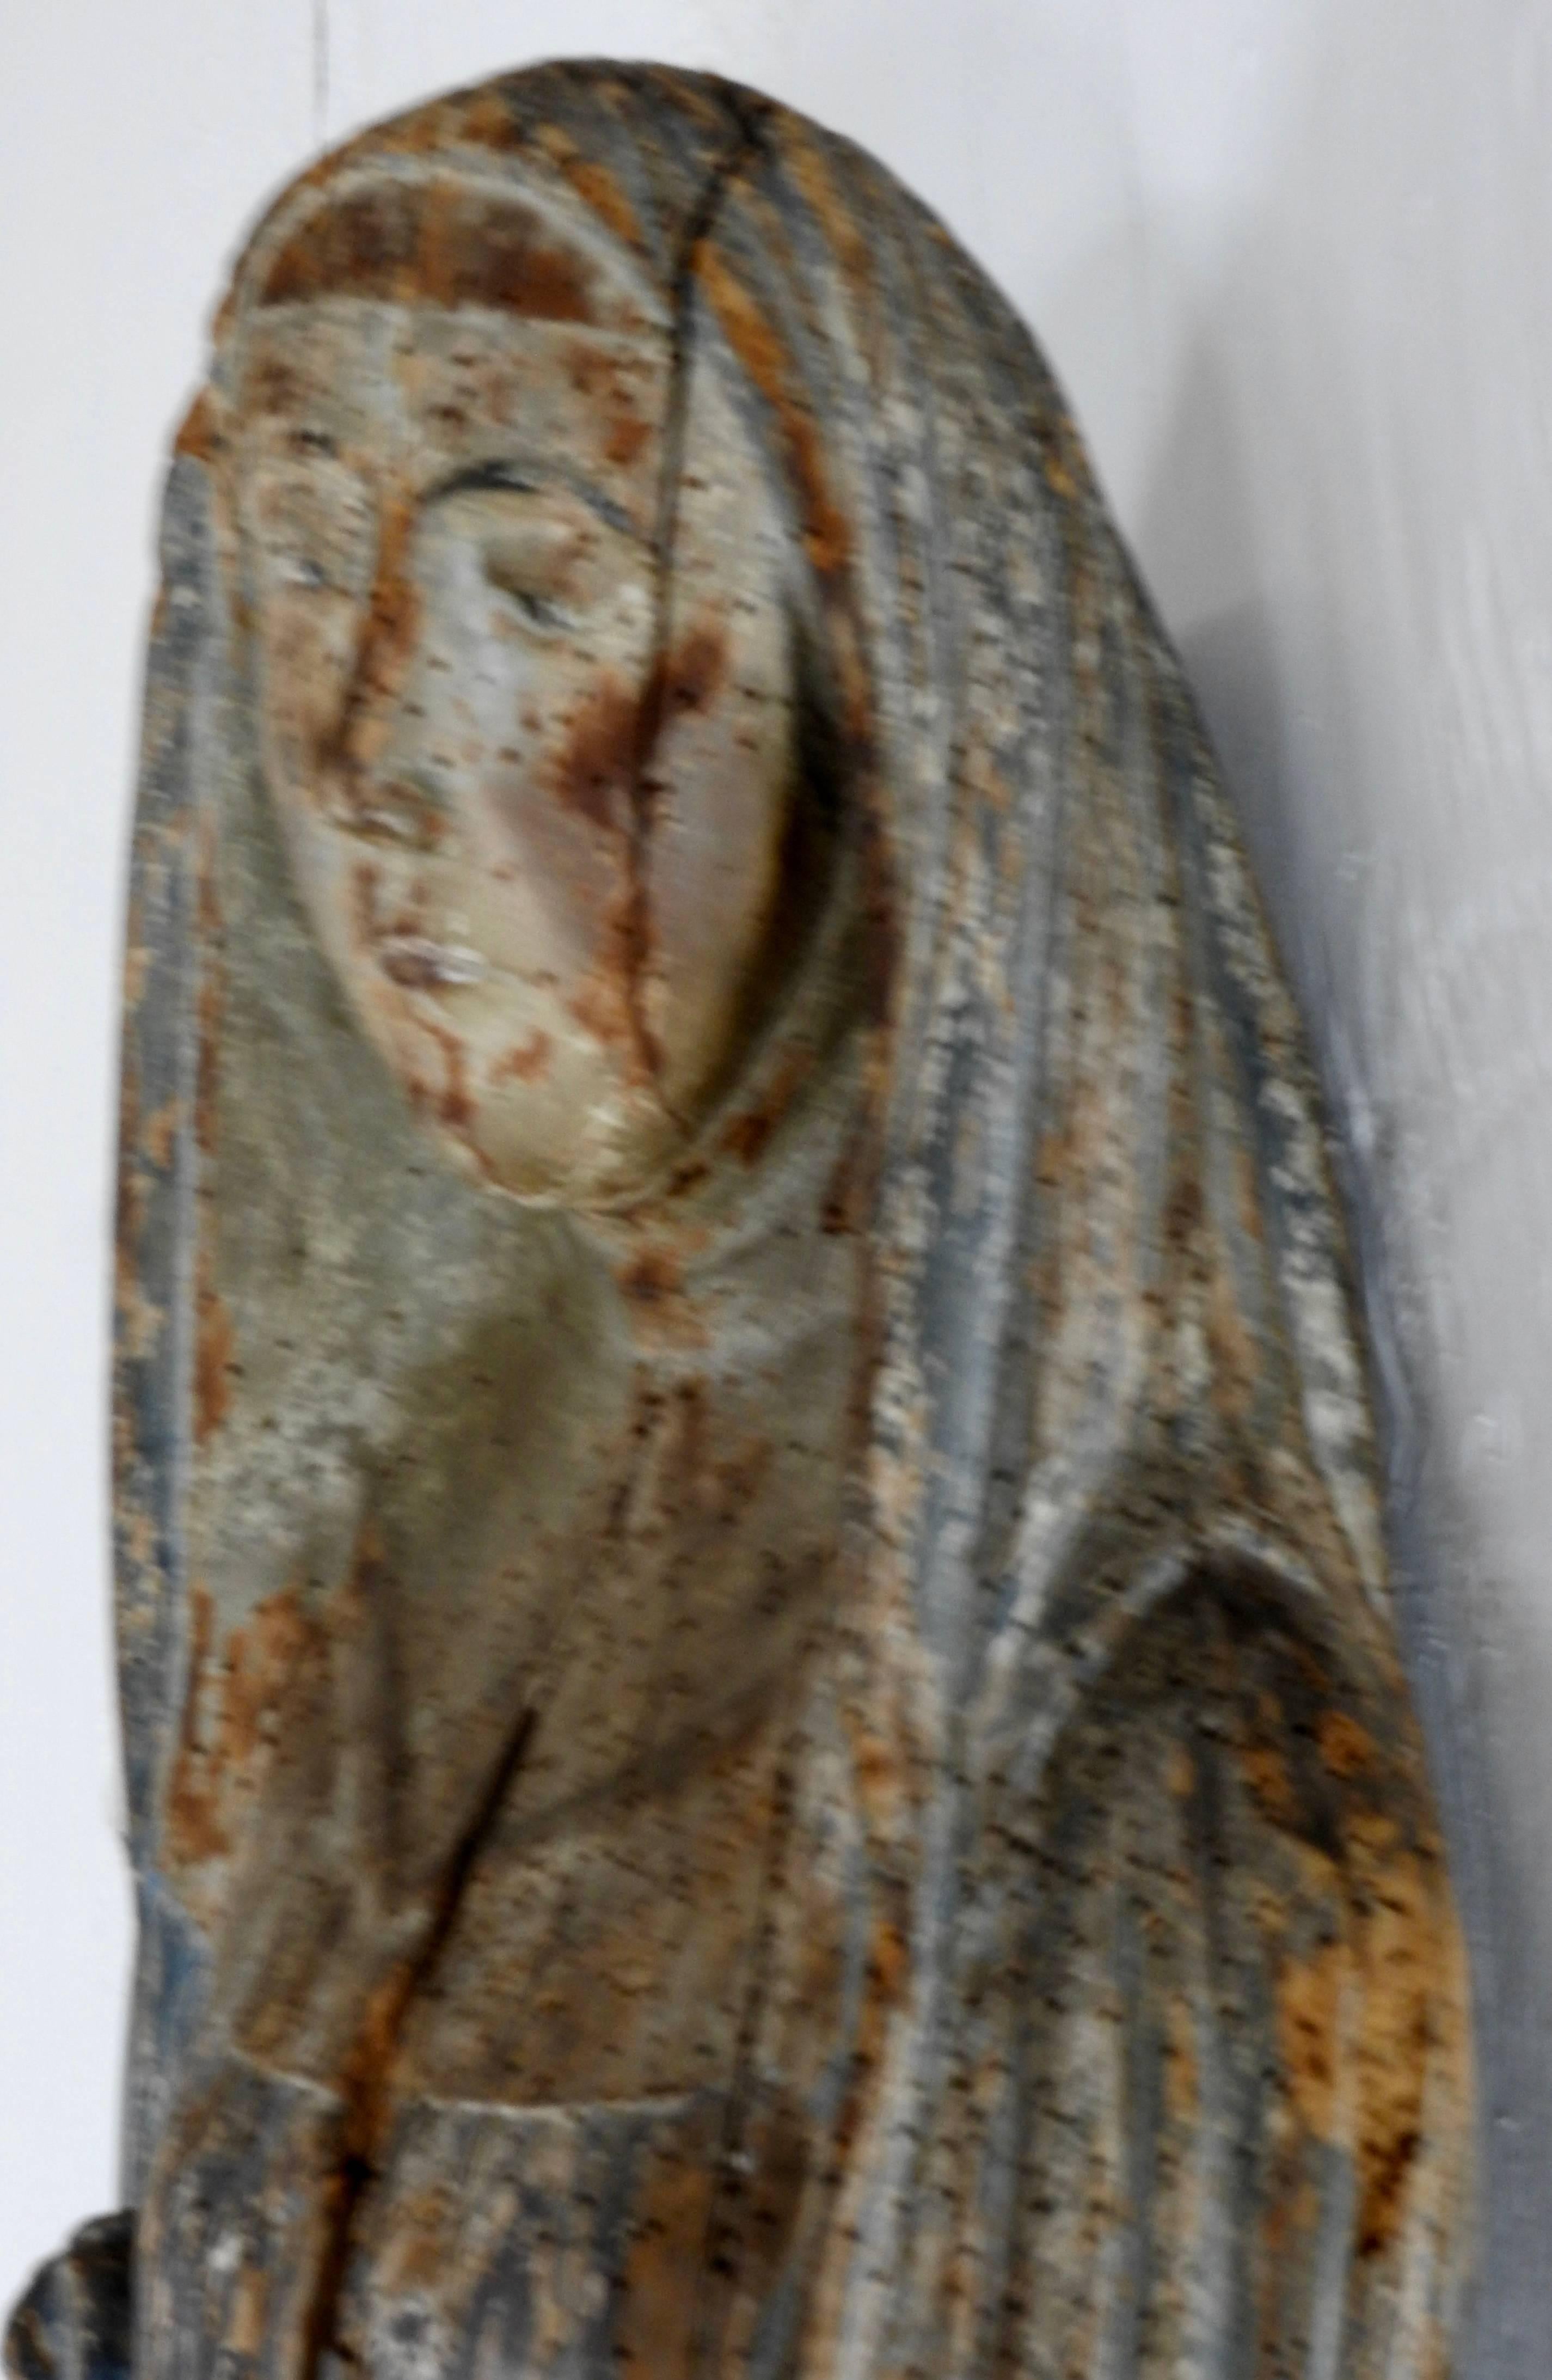 Hand-Carved Early 17th Century Primitive Religious Wooden Carving of Virgin Mary